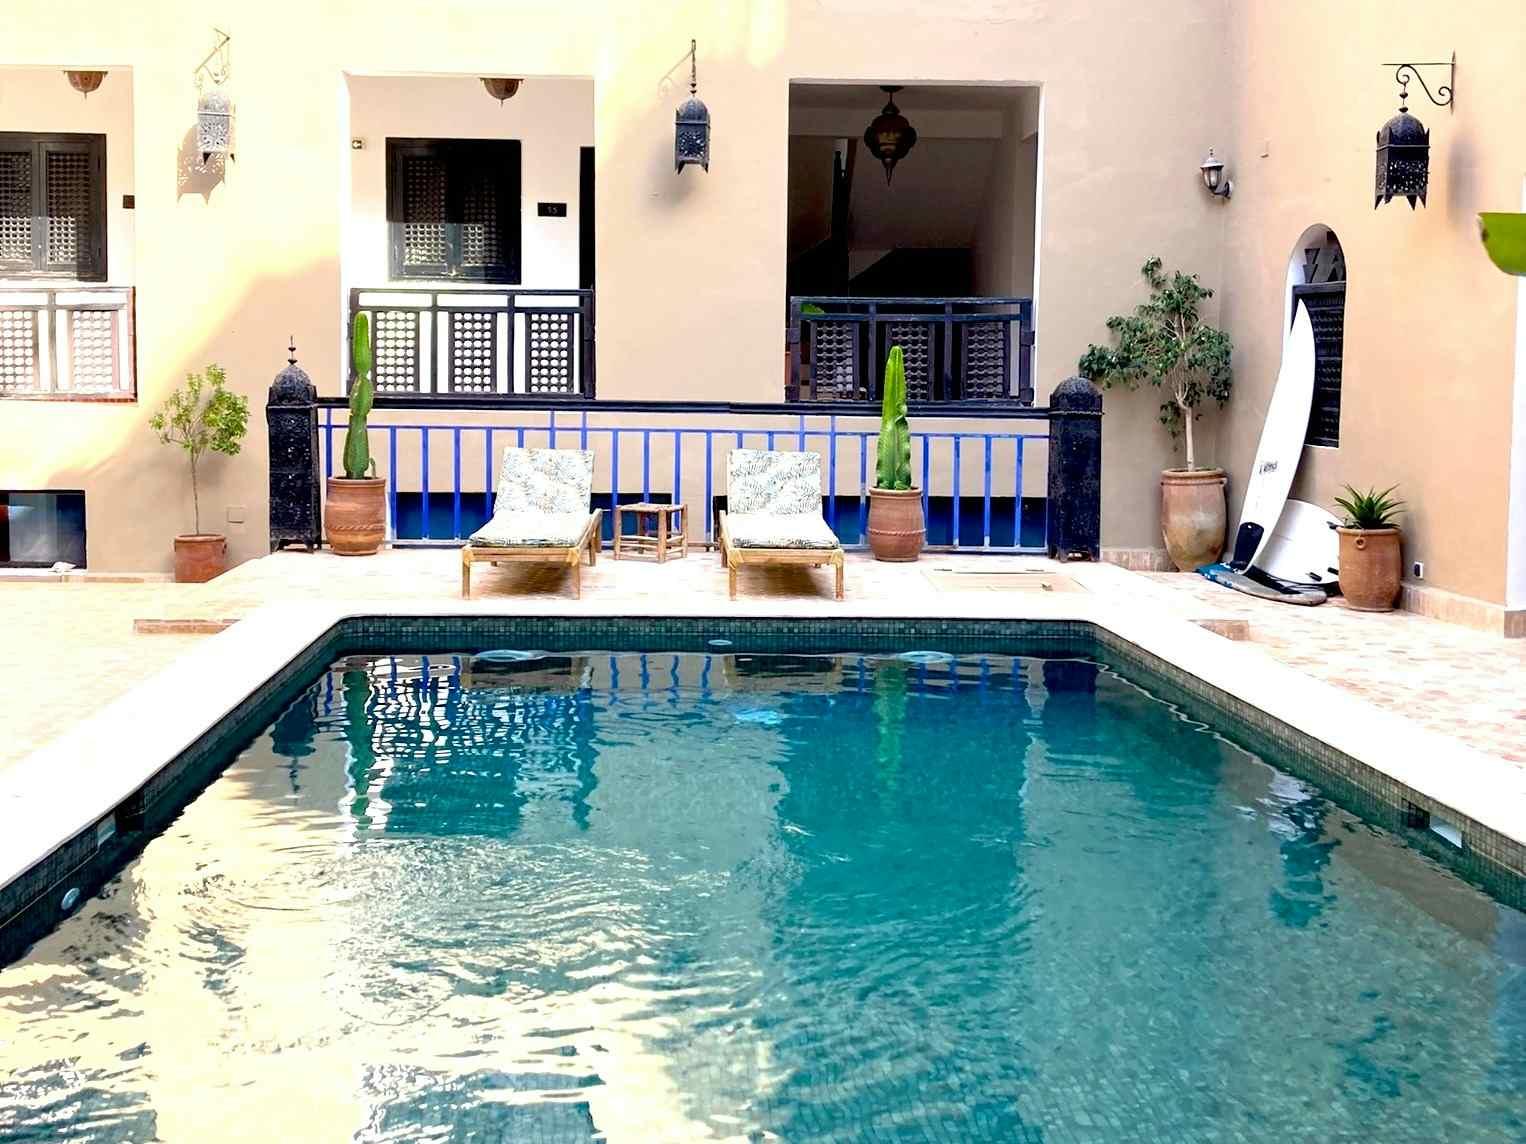 Image of Riad, Morocco. Photo: Host/ Mint Surf